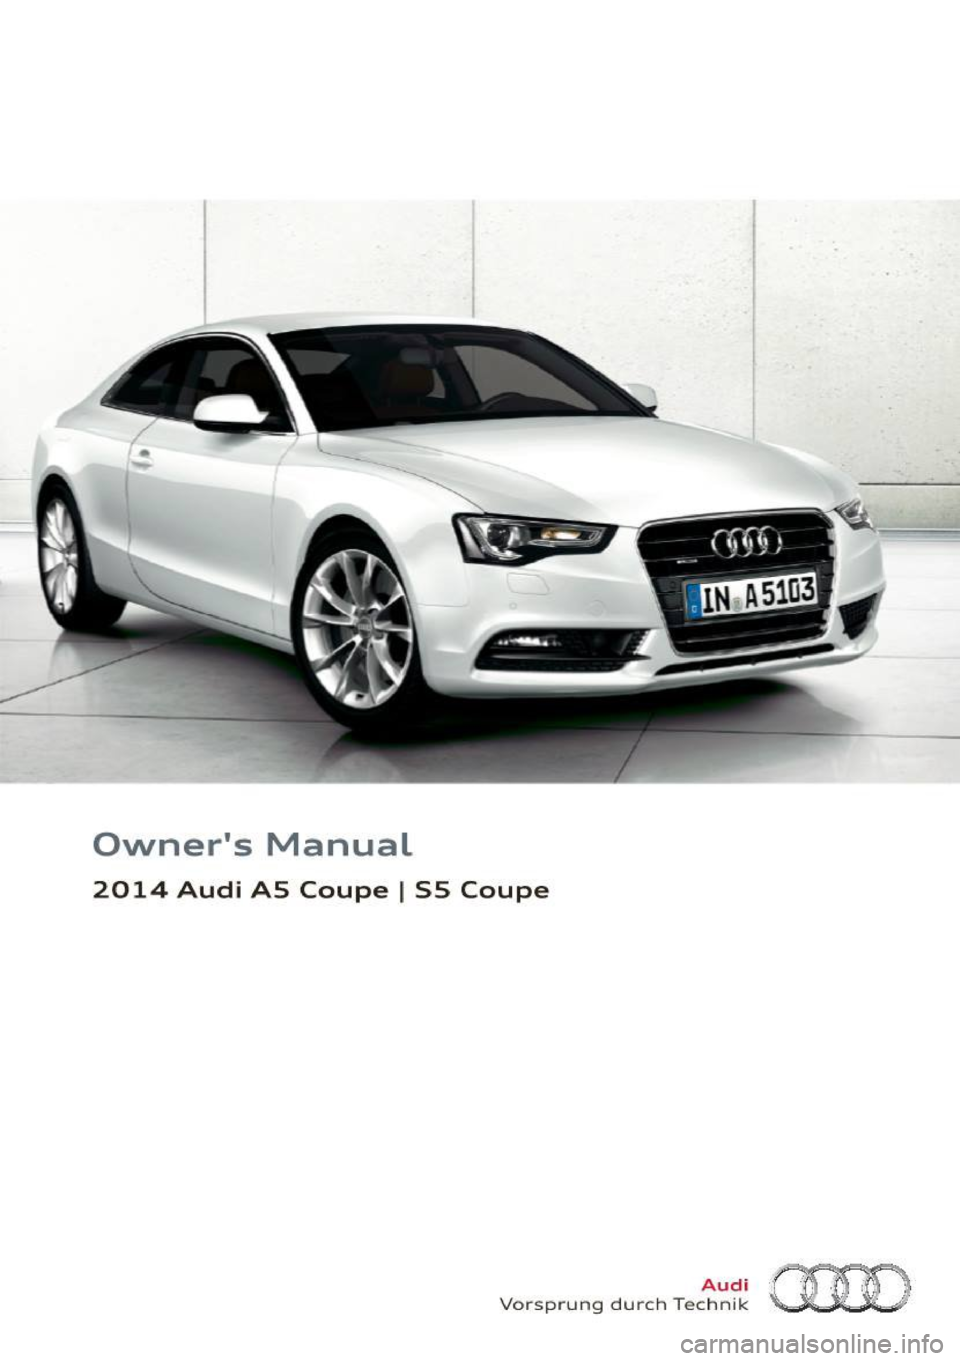 AUDI A5 COUPE 2014  Owners Manual 